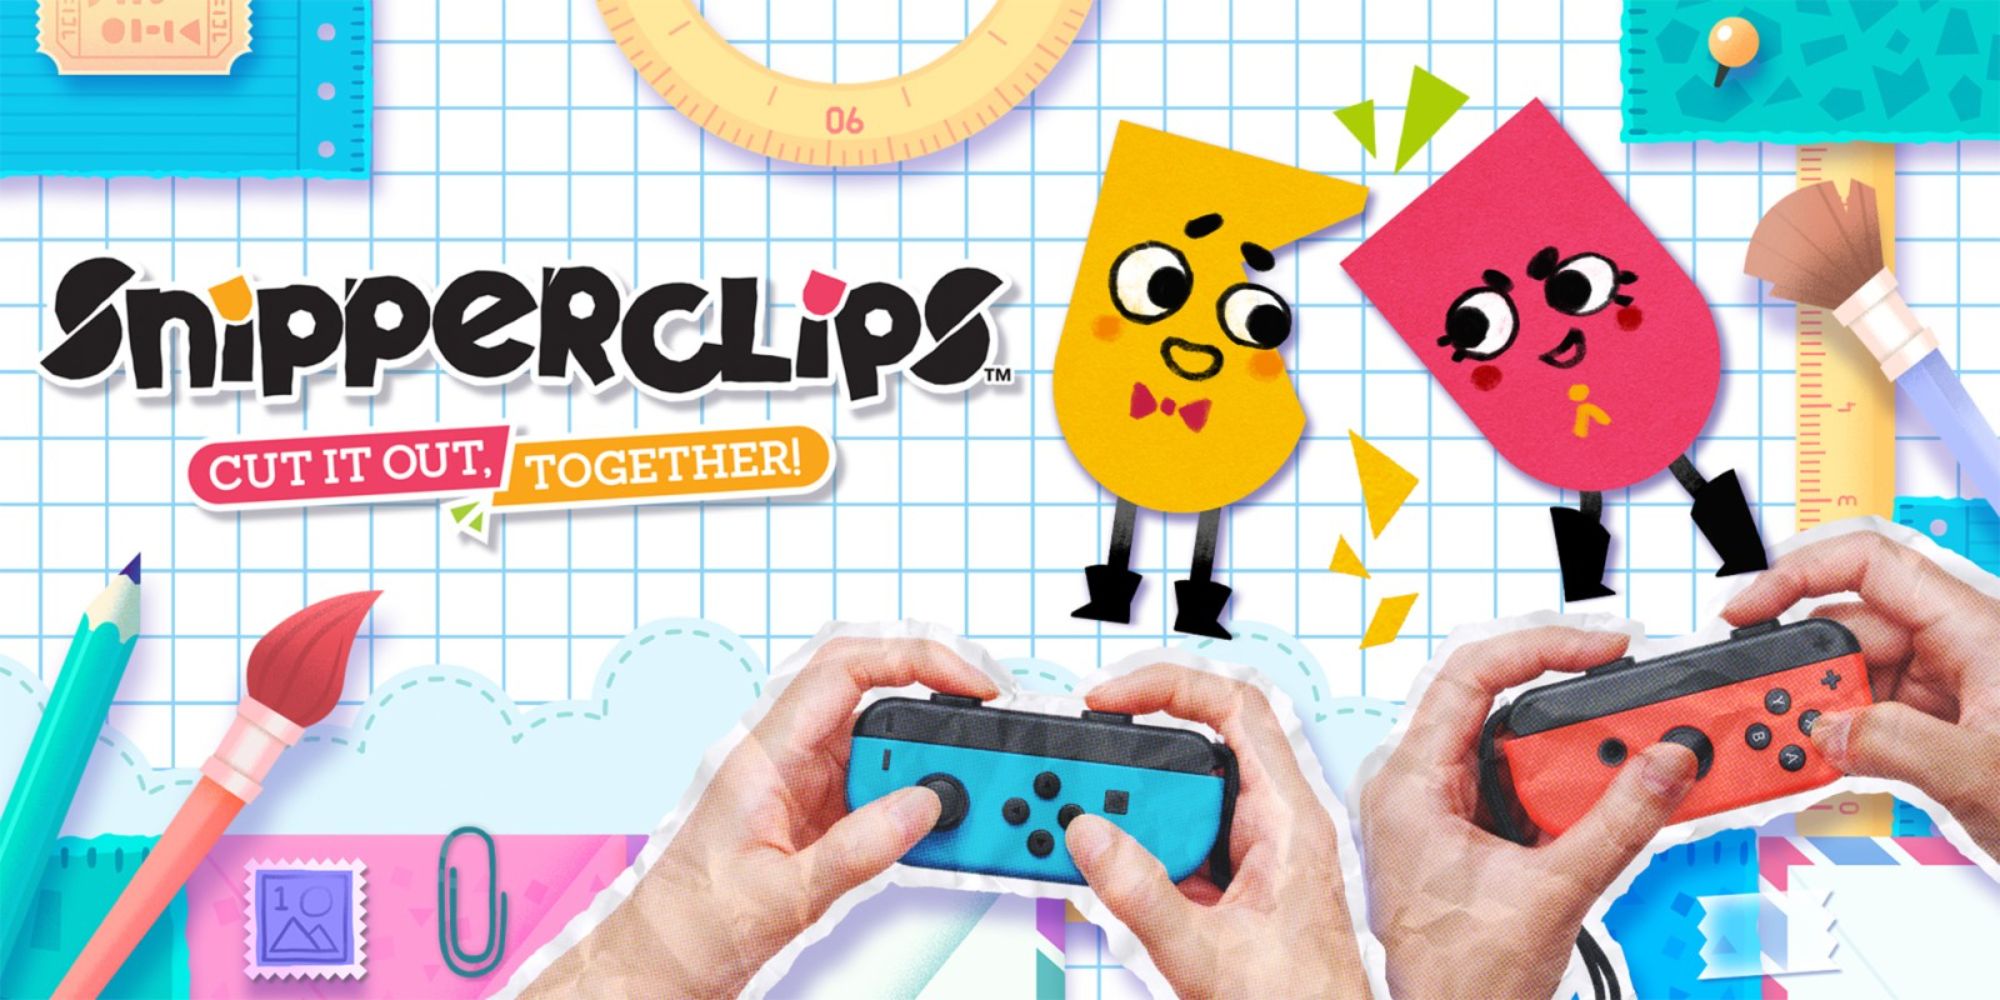 Snipperclips offical game over, with Snip and Clip posing to the right of the game title